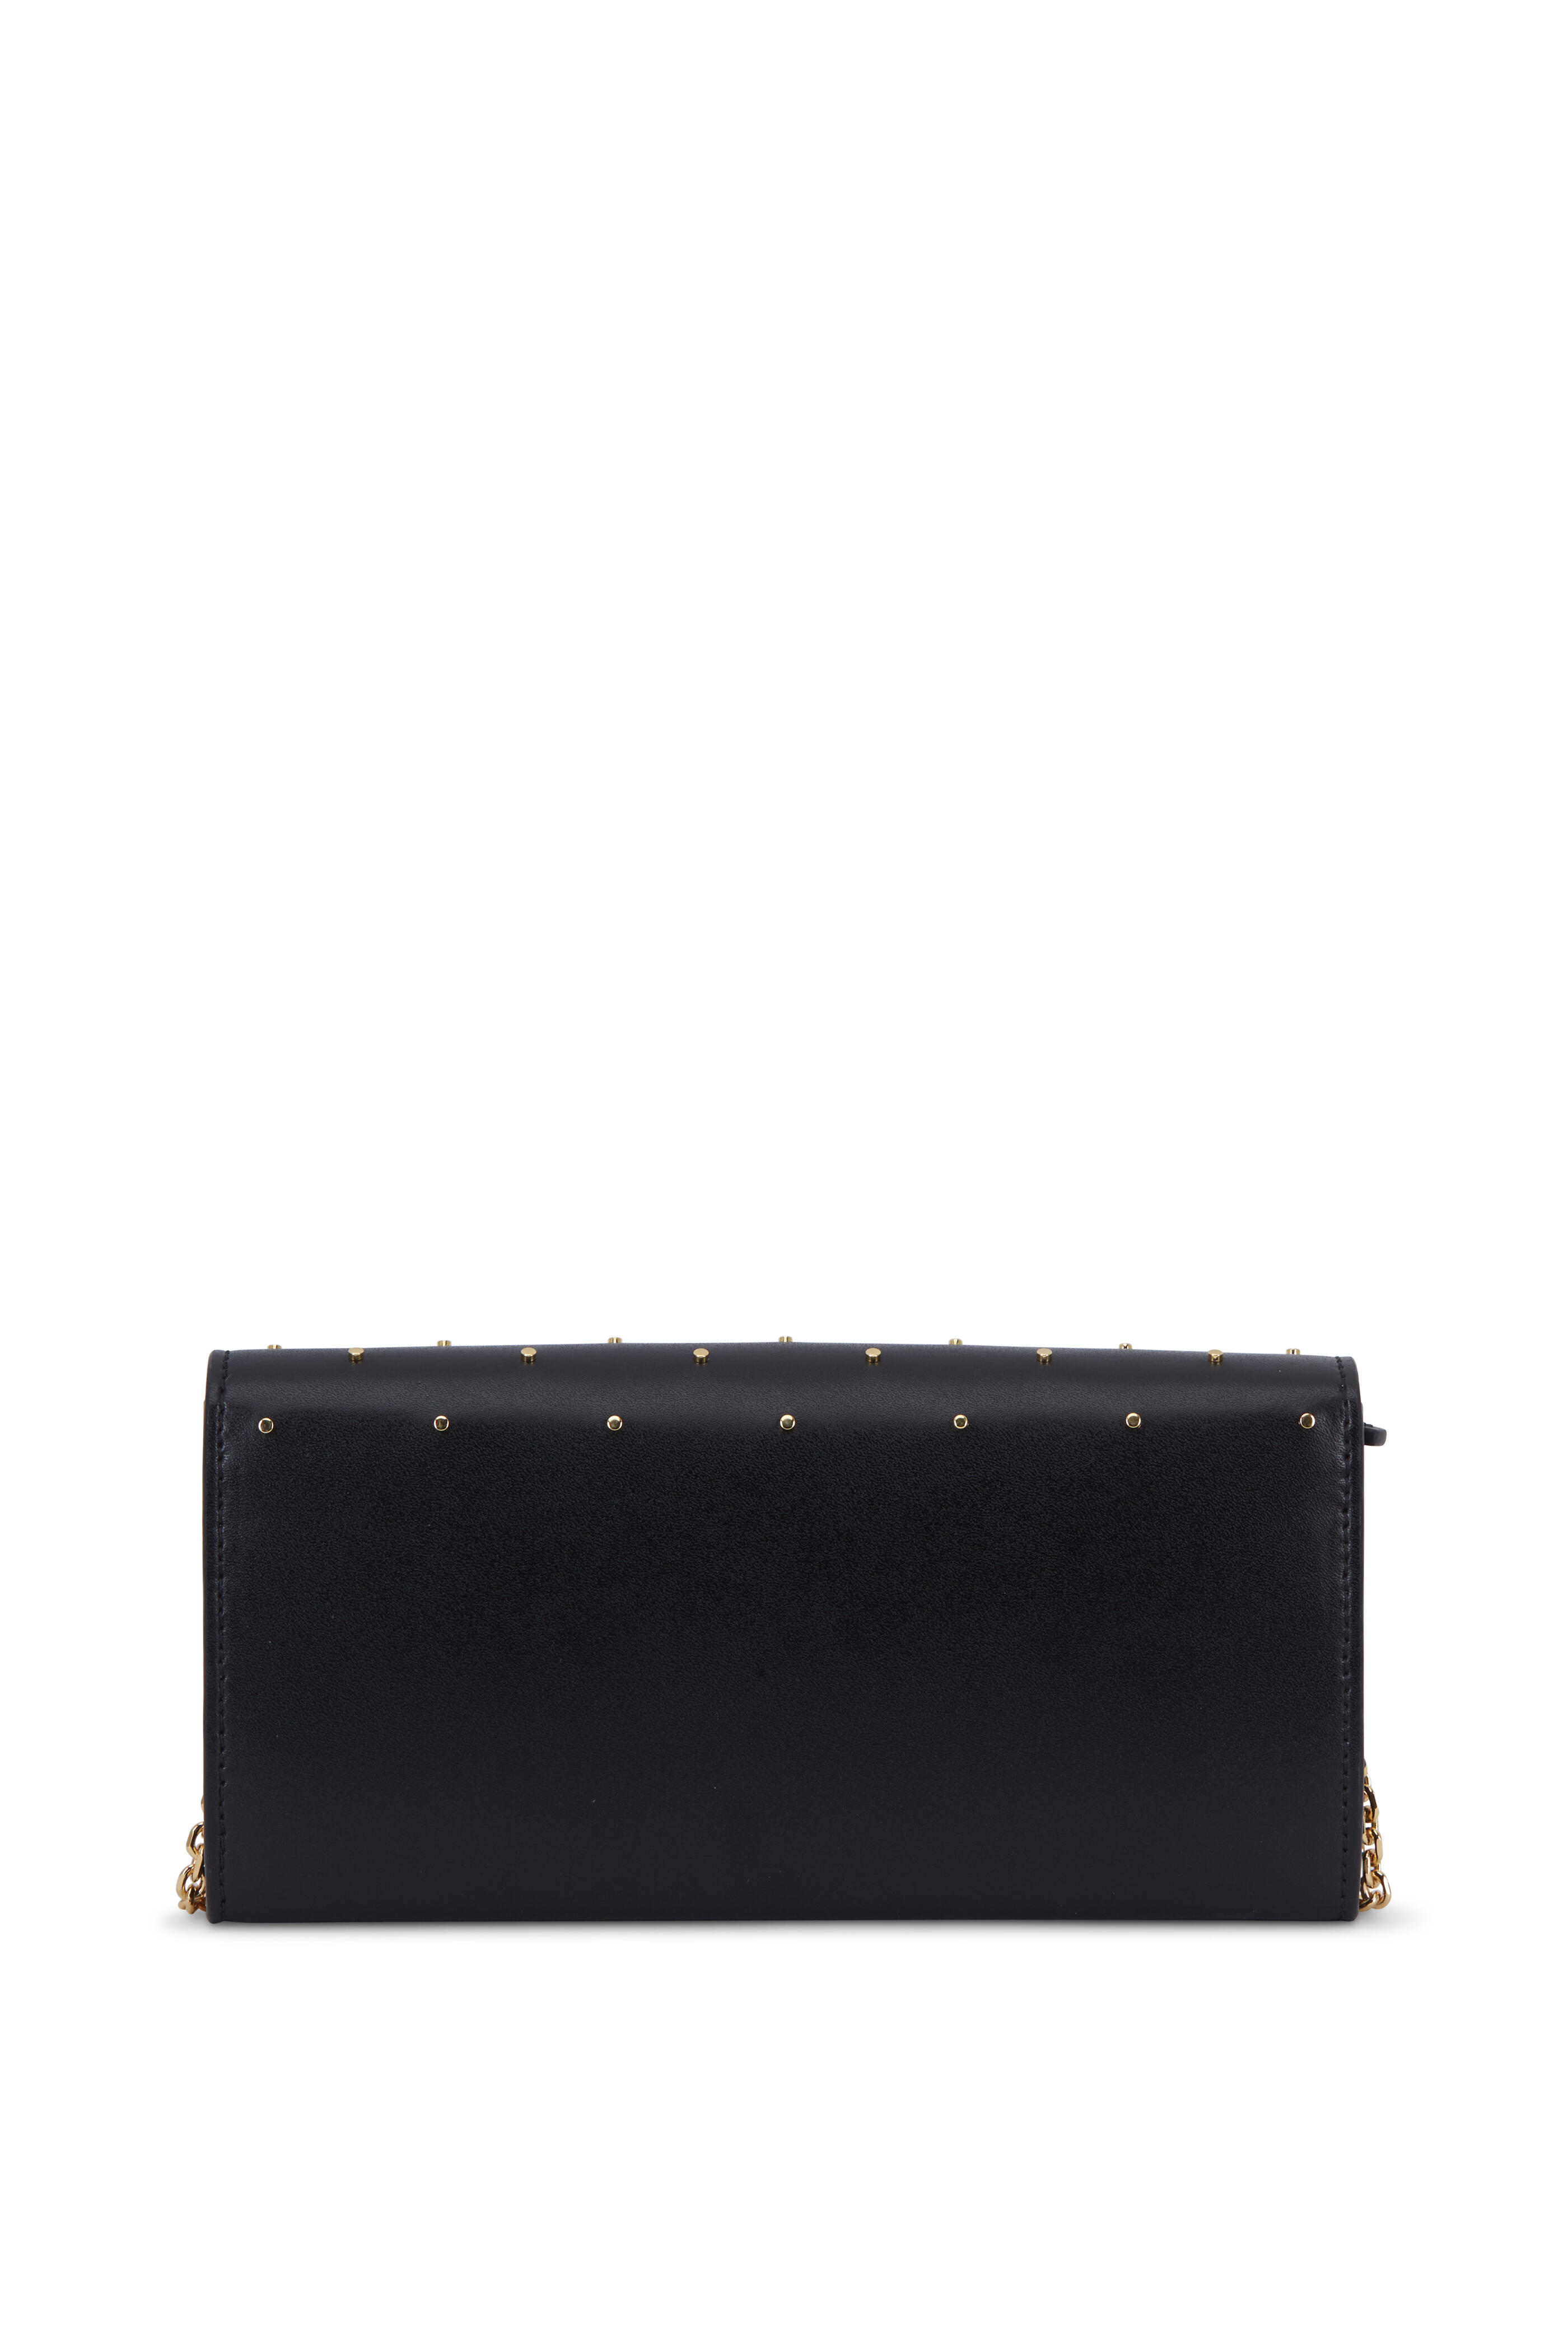 Fendi - Black Leather Studded Chain Continental Wallet